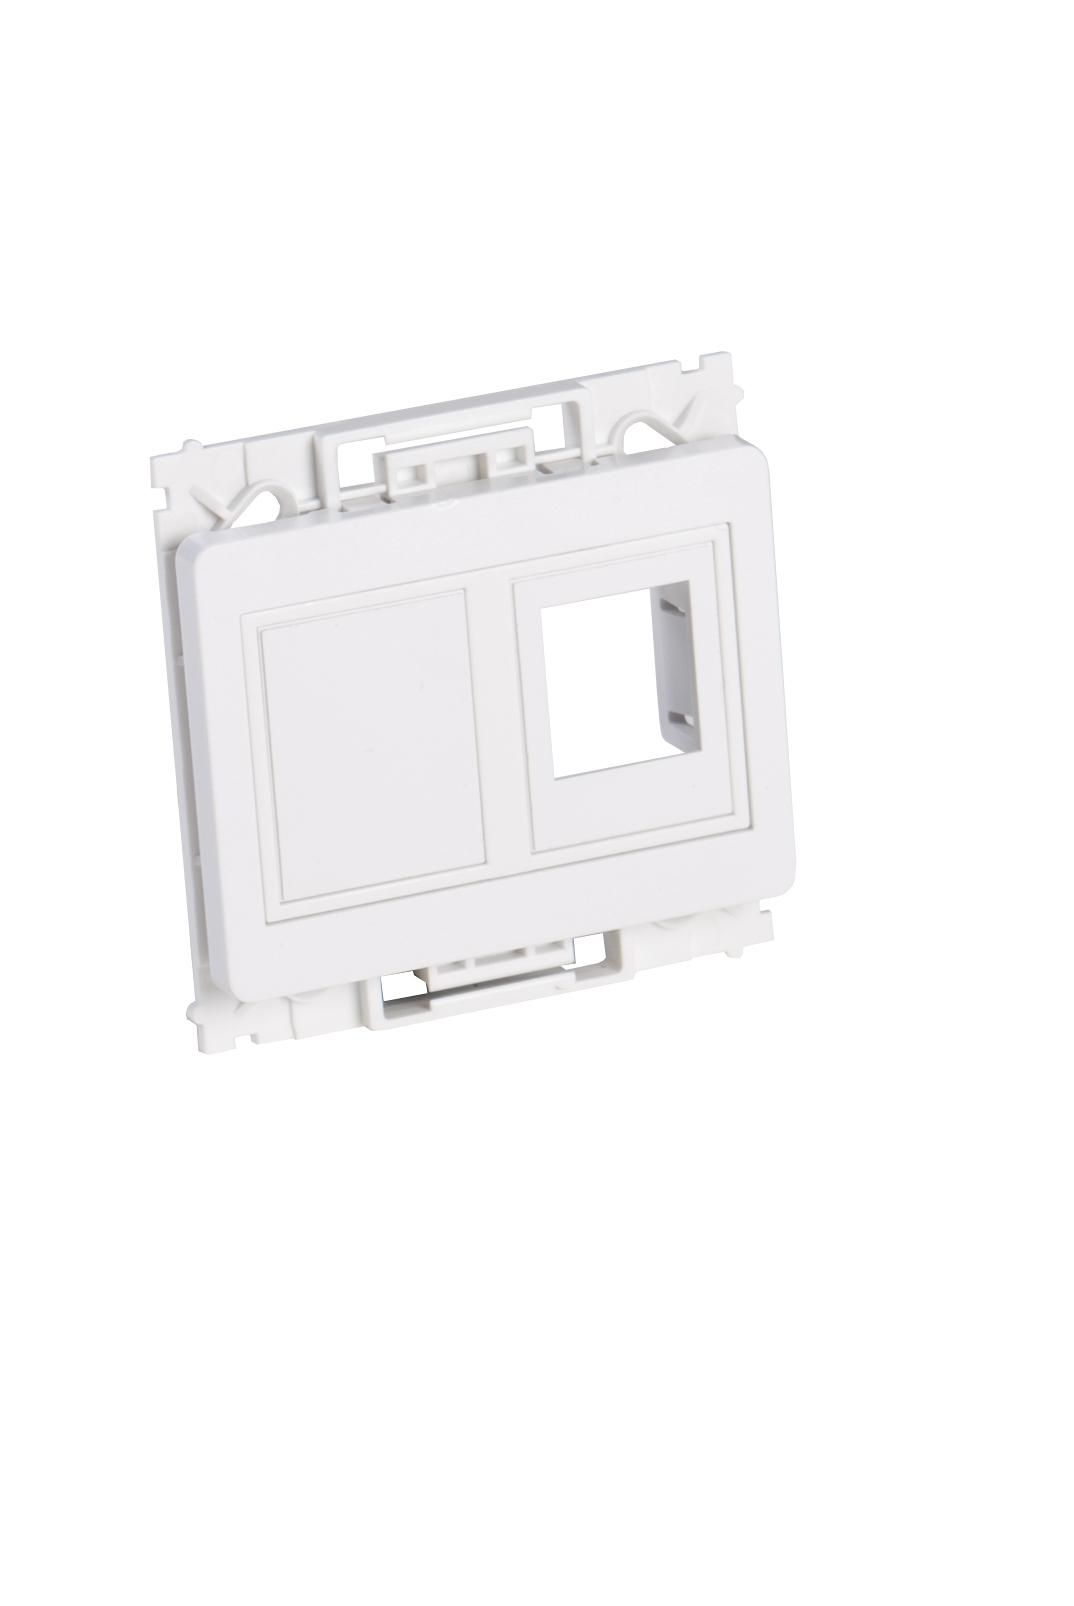 LVN126160 Lanview Wall plate 2 x keystone for  OPUS outlet white